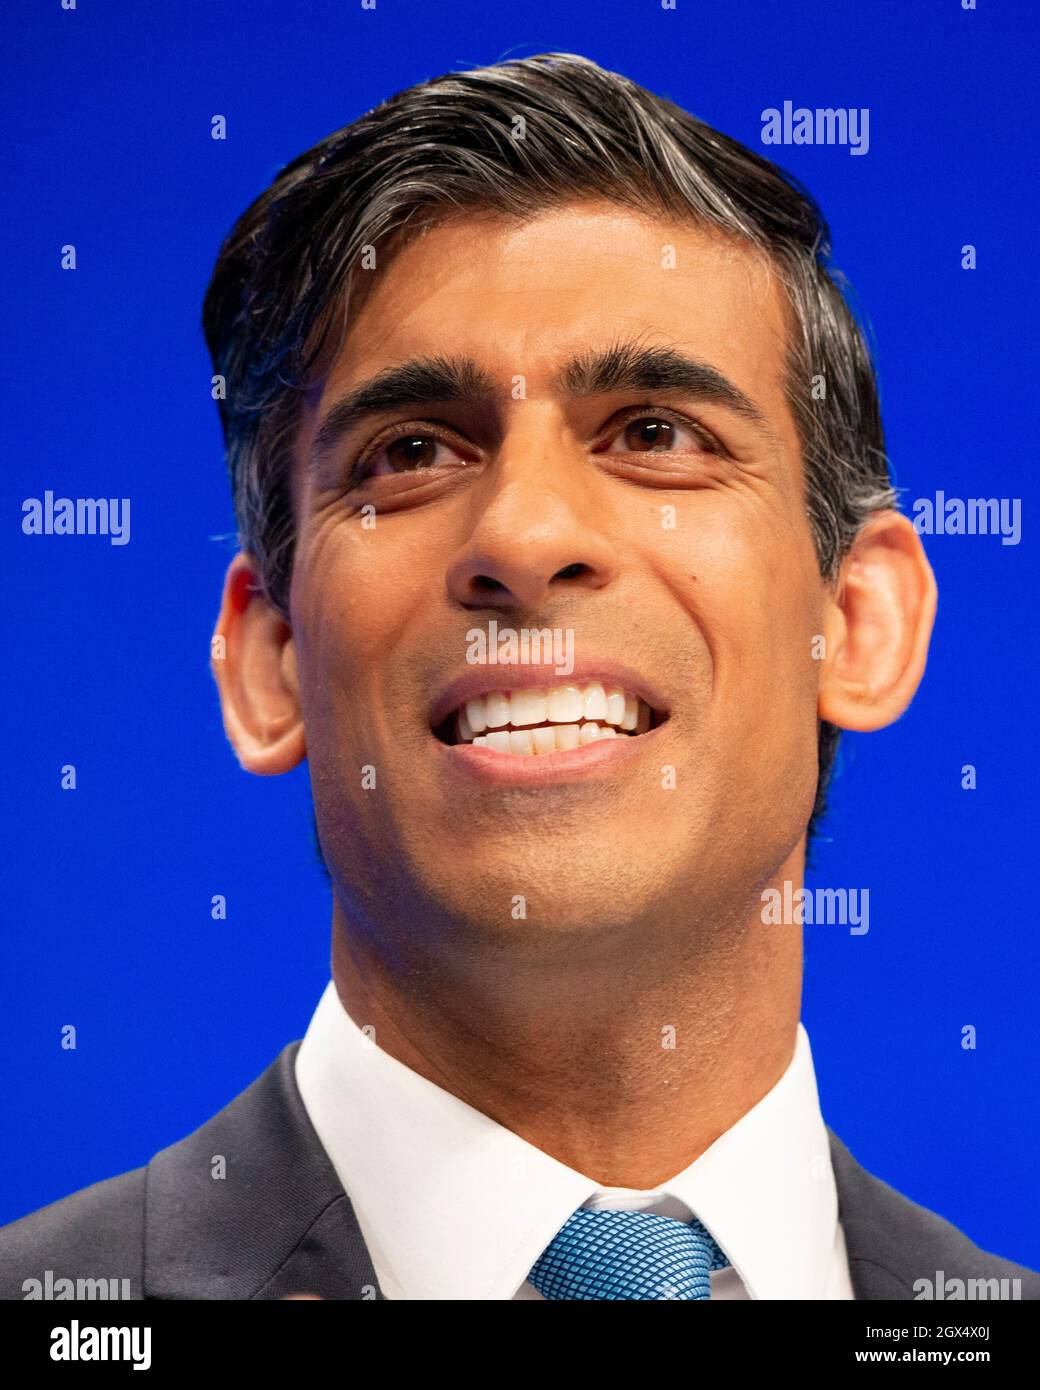 Manchester, England, UK. 4th Oct, 2021. PICTURED: Rt Hon Rishi Sunak MP, UK Chancellor of the Exchequer, delivers key note speech at the Conservative party Conference #CPC21. Credit: Colin Fisher/Alamy Live News Stock Photo